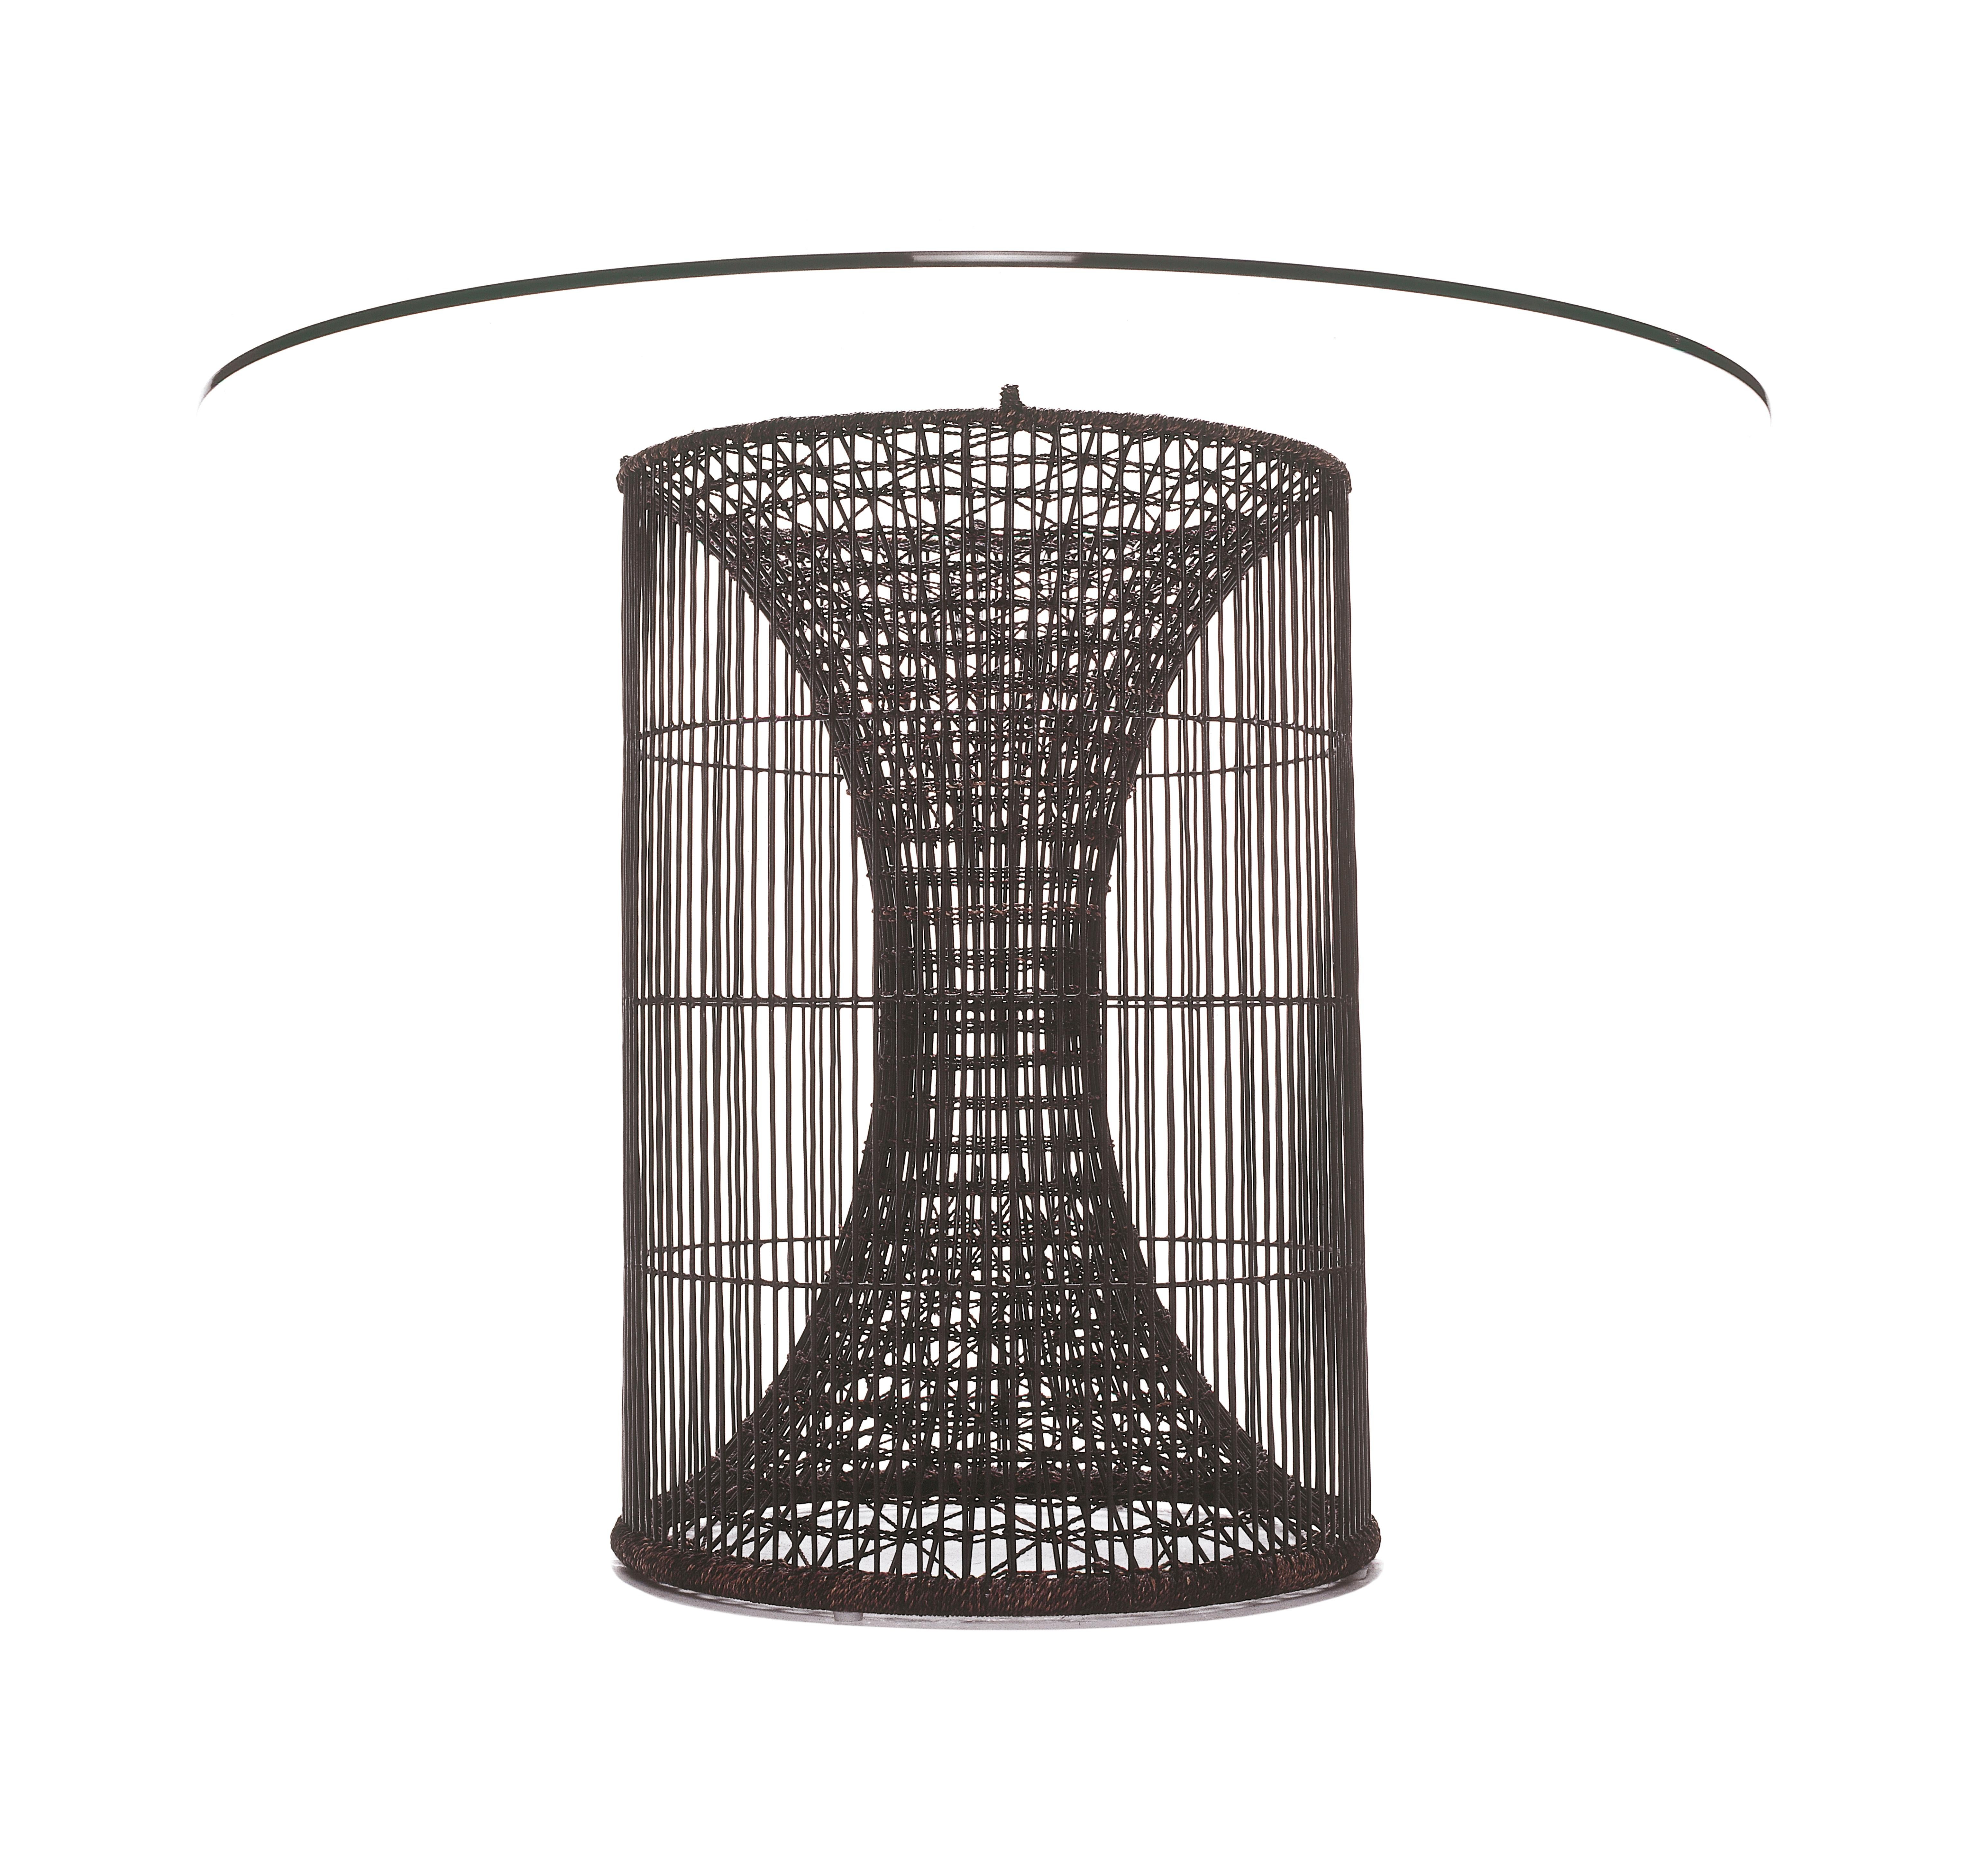 Amaya large dining table by Kenneth Cobonpue.
Materials: Abacca. Steel. Glass.
Dimensions: 
Table diameter 76 cm x H 74 cm
Glass diameter 137cm x H 1cm.

Inspired by fish traps, the Amaya tables resemble a vortex enclosed within a cylinder.